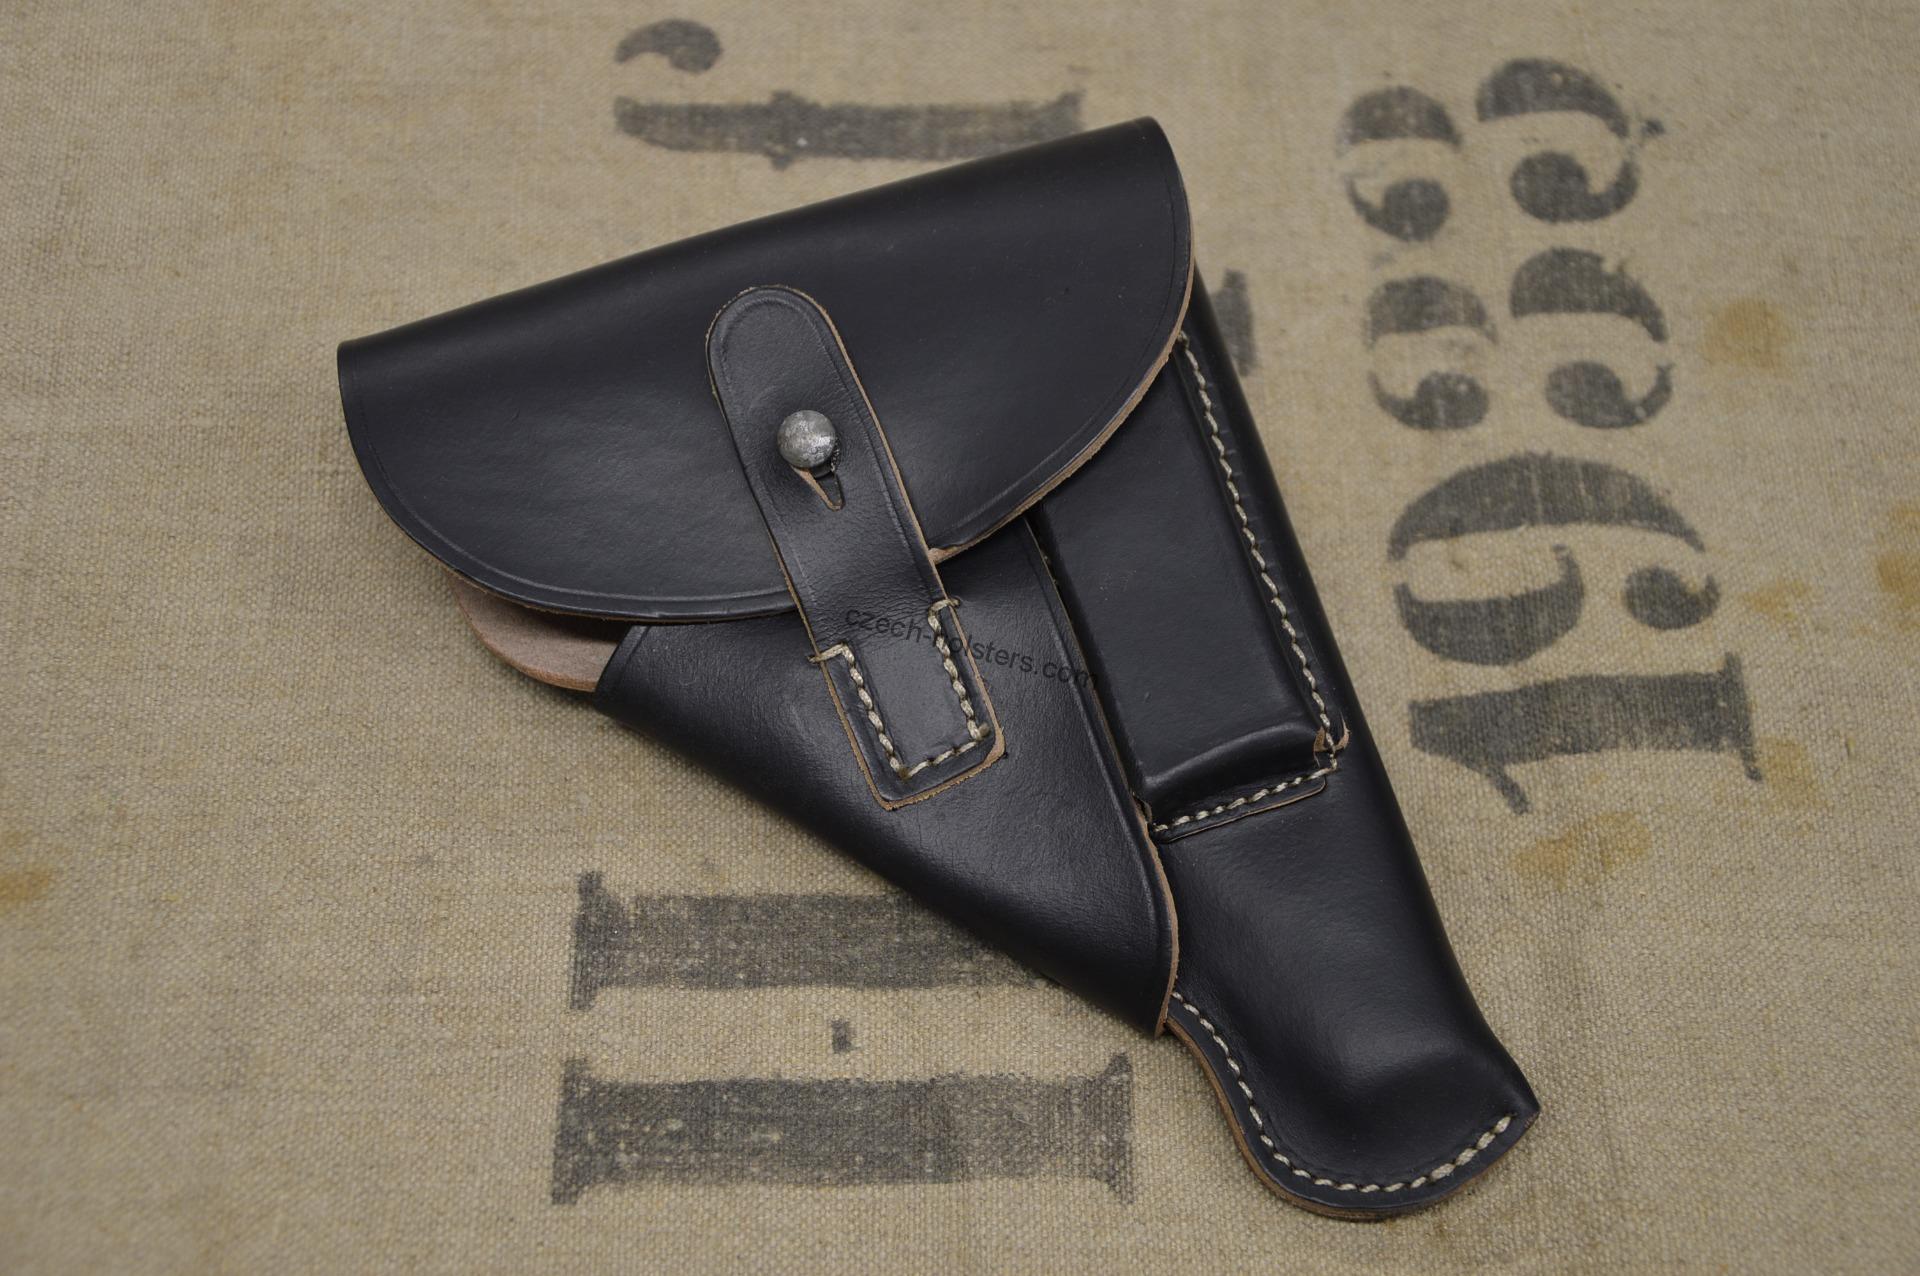 WW2 German 100% Handmade Leather Holster Walther PP - Black